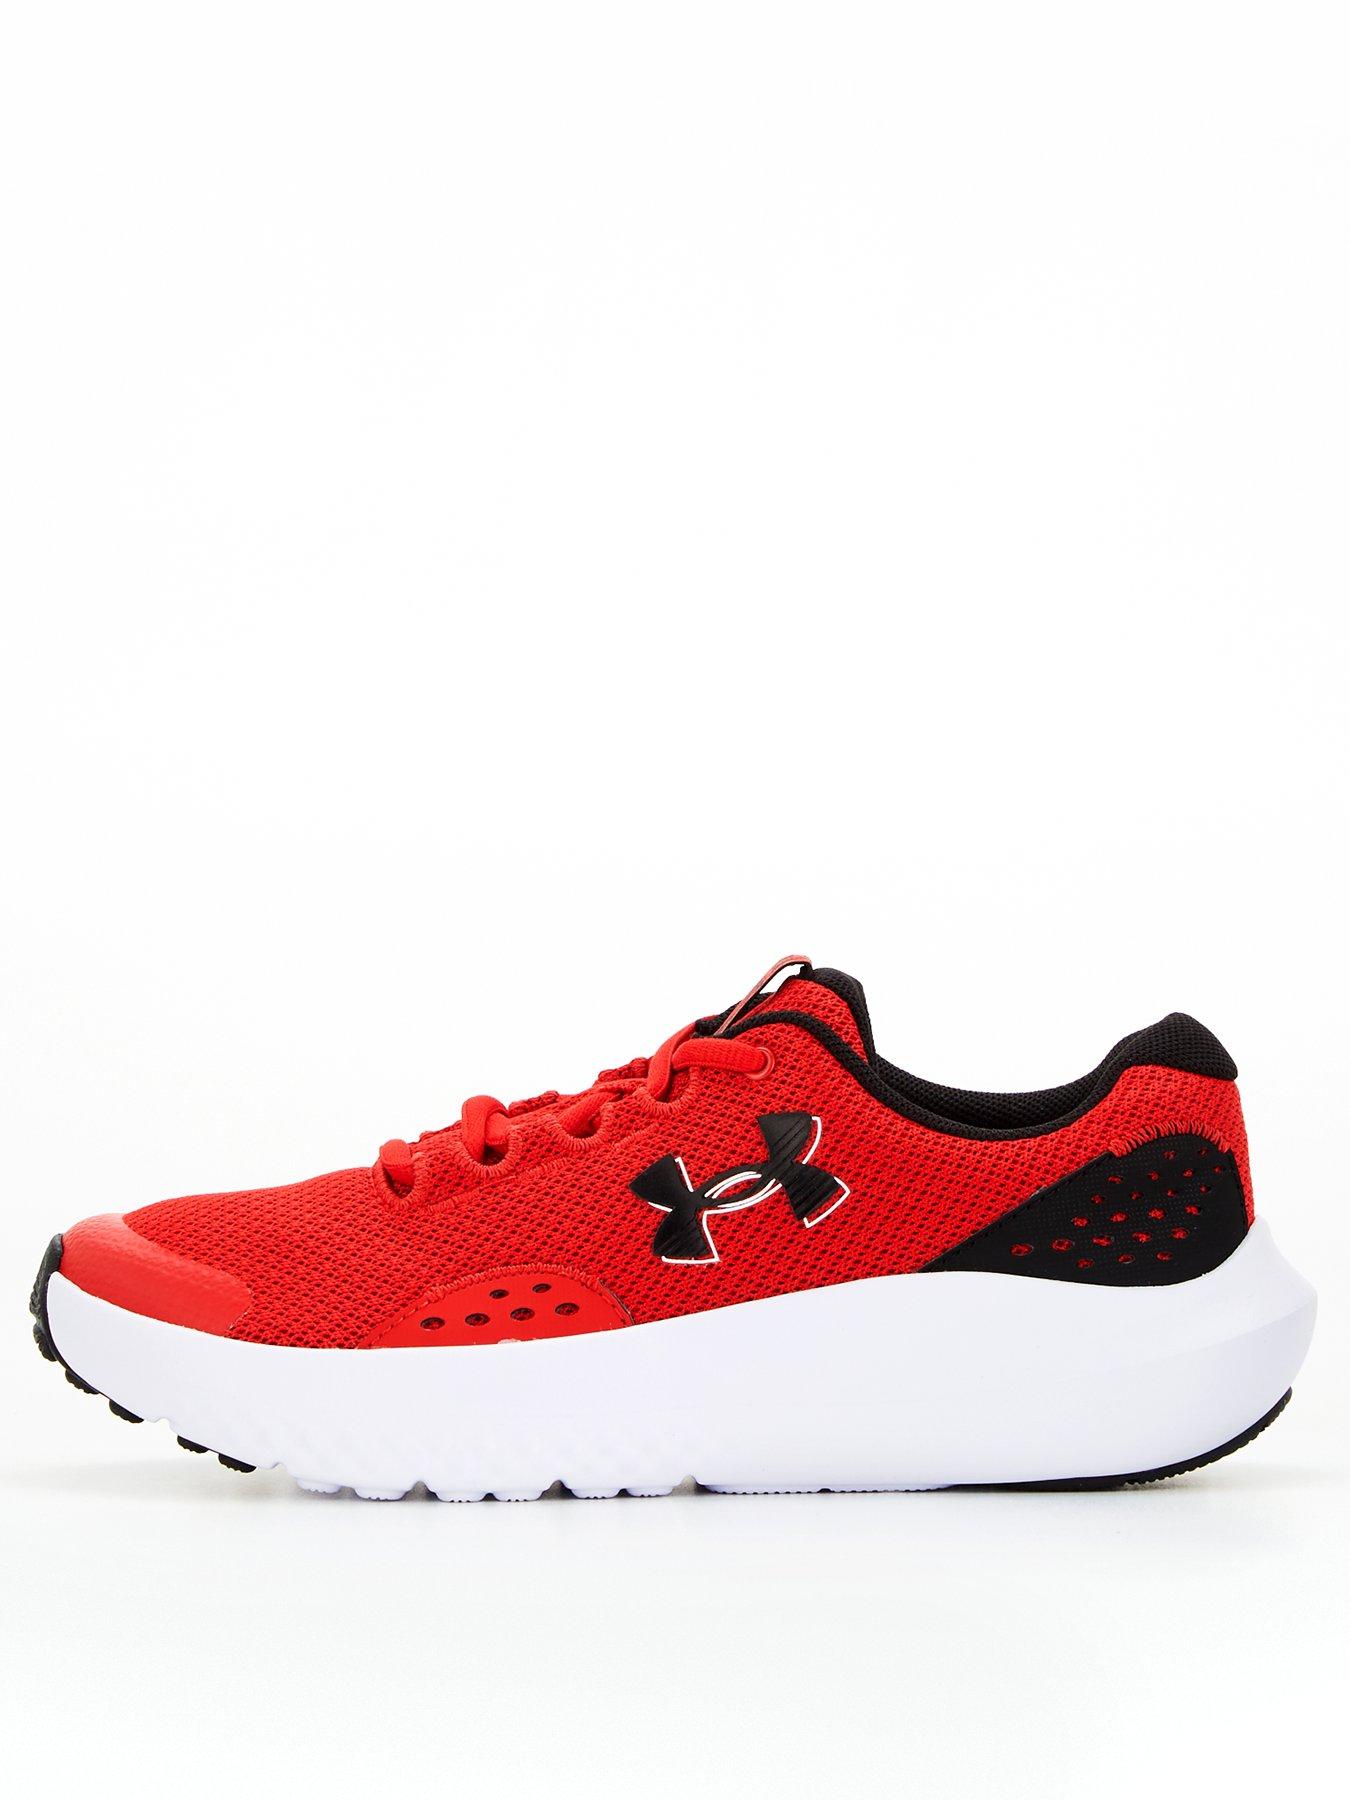 UNDER ARMOUR Junior Boys Running Surge 4 Trainers - Red/black, Red, Size 4 Older